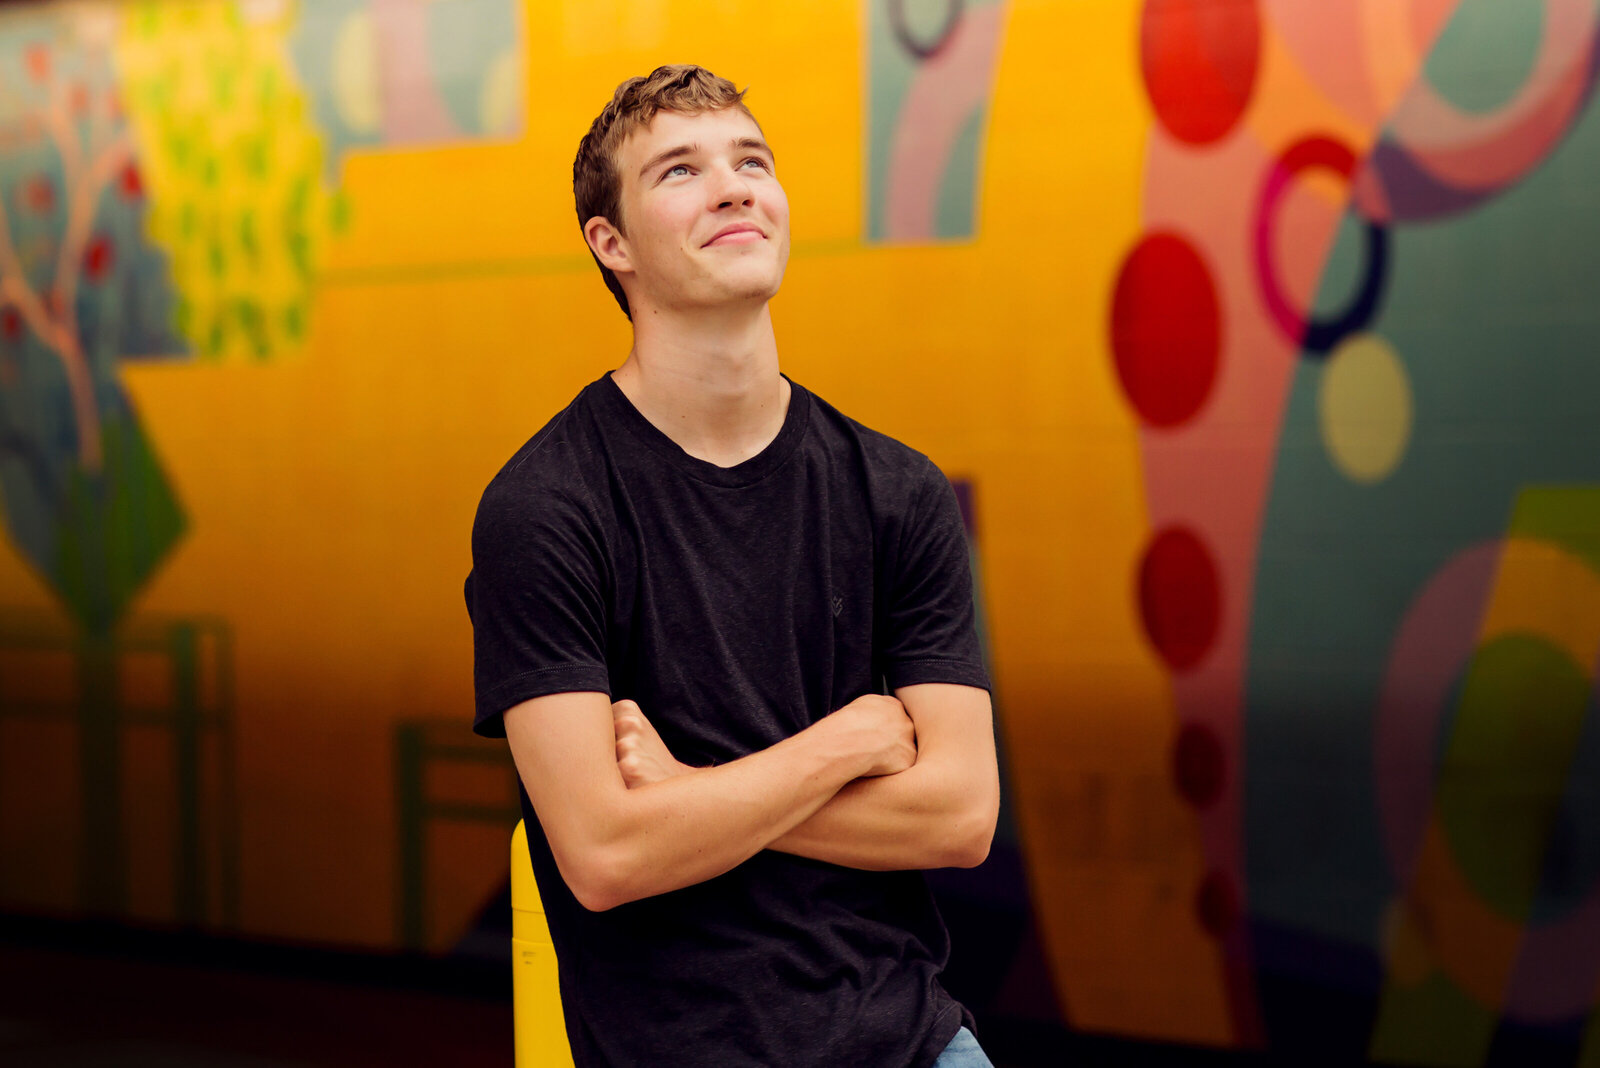 Senior boy looking up towards the sky with a very colorful and geometrical wall behind him.